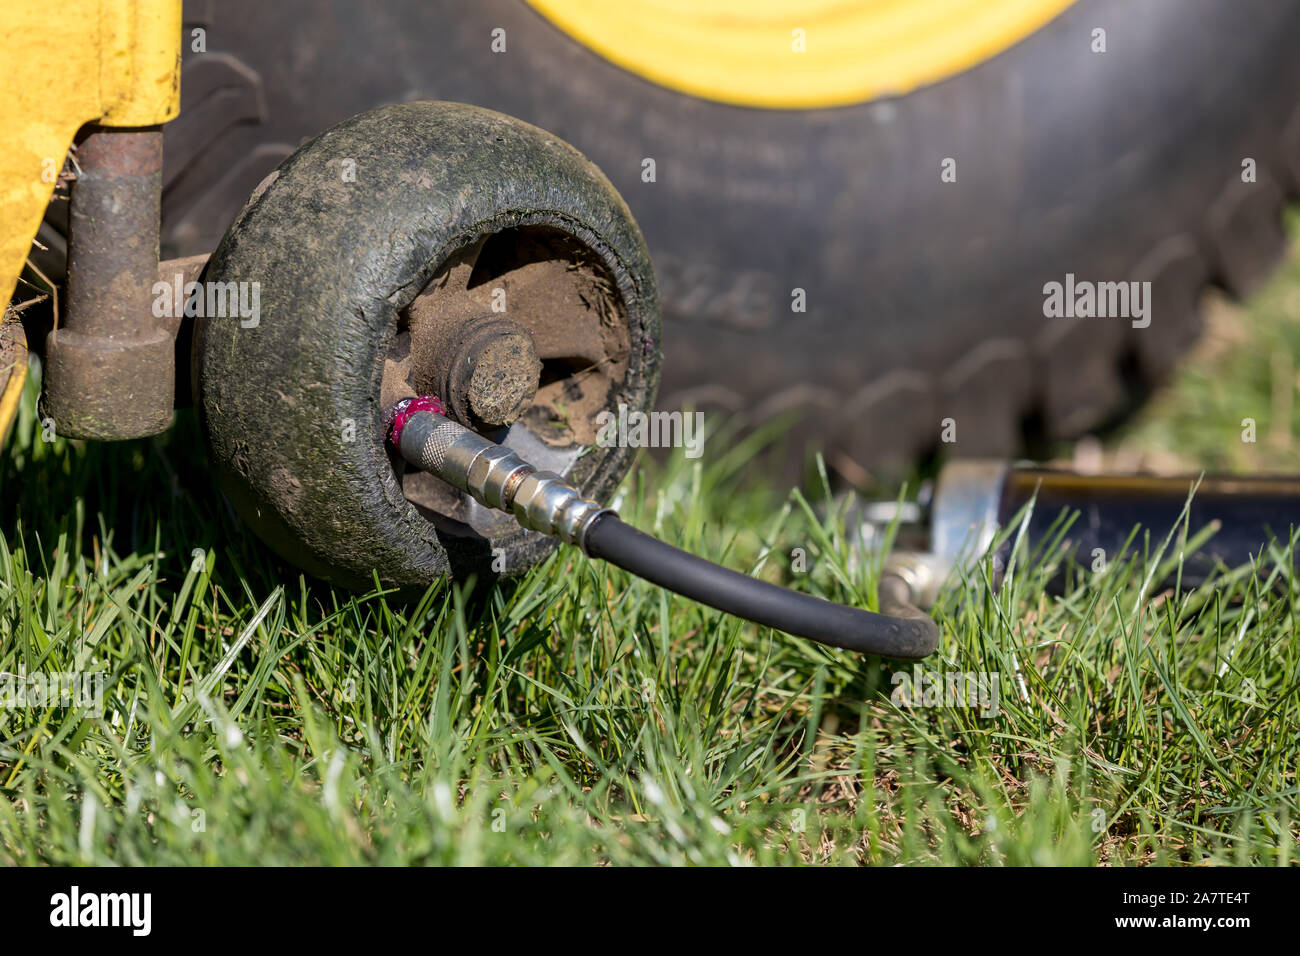 Lawnmower deck height gauge wheel bearing being lubricated with grease gun. Concept of home and lawn equipment maintenance and repair Stock Photo